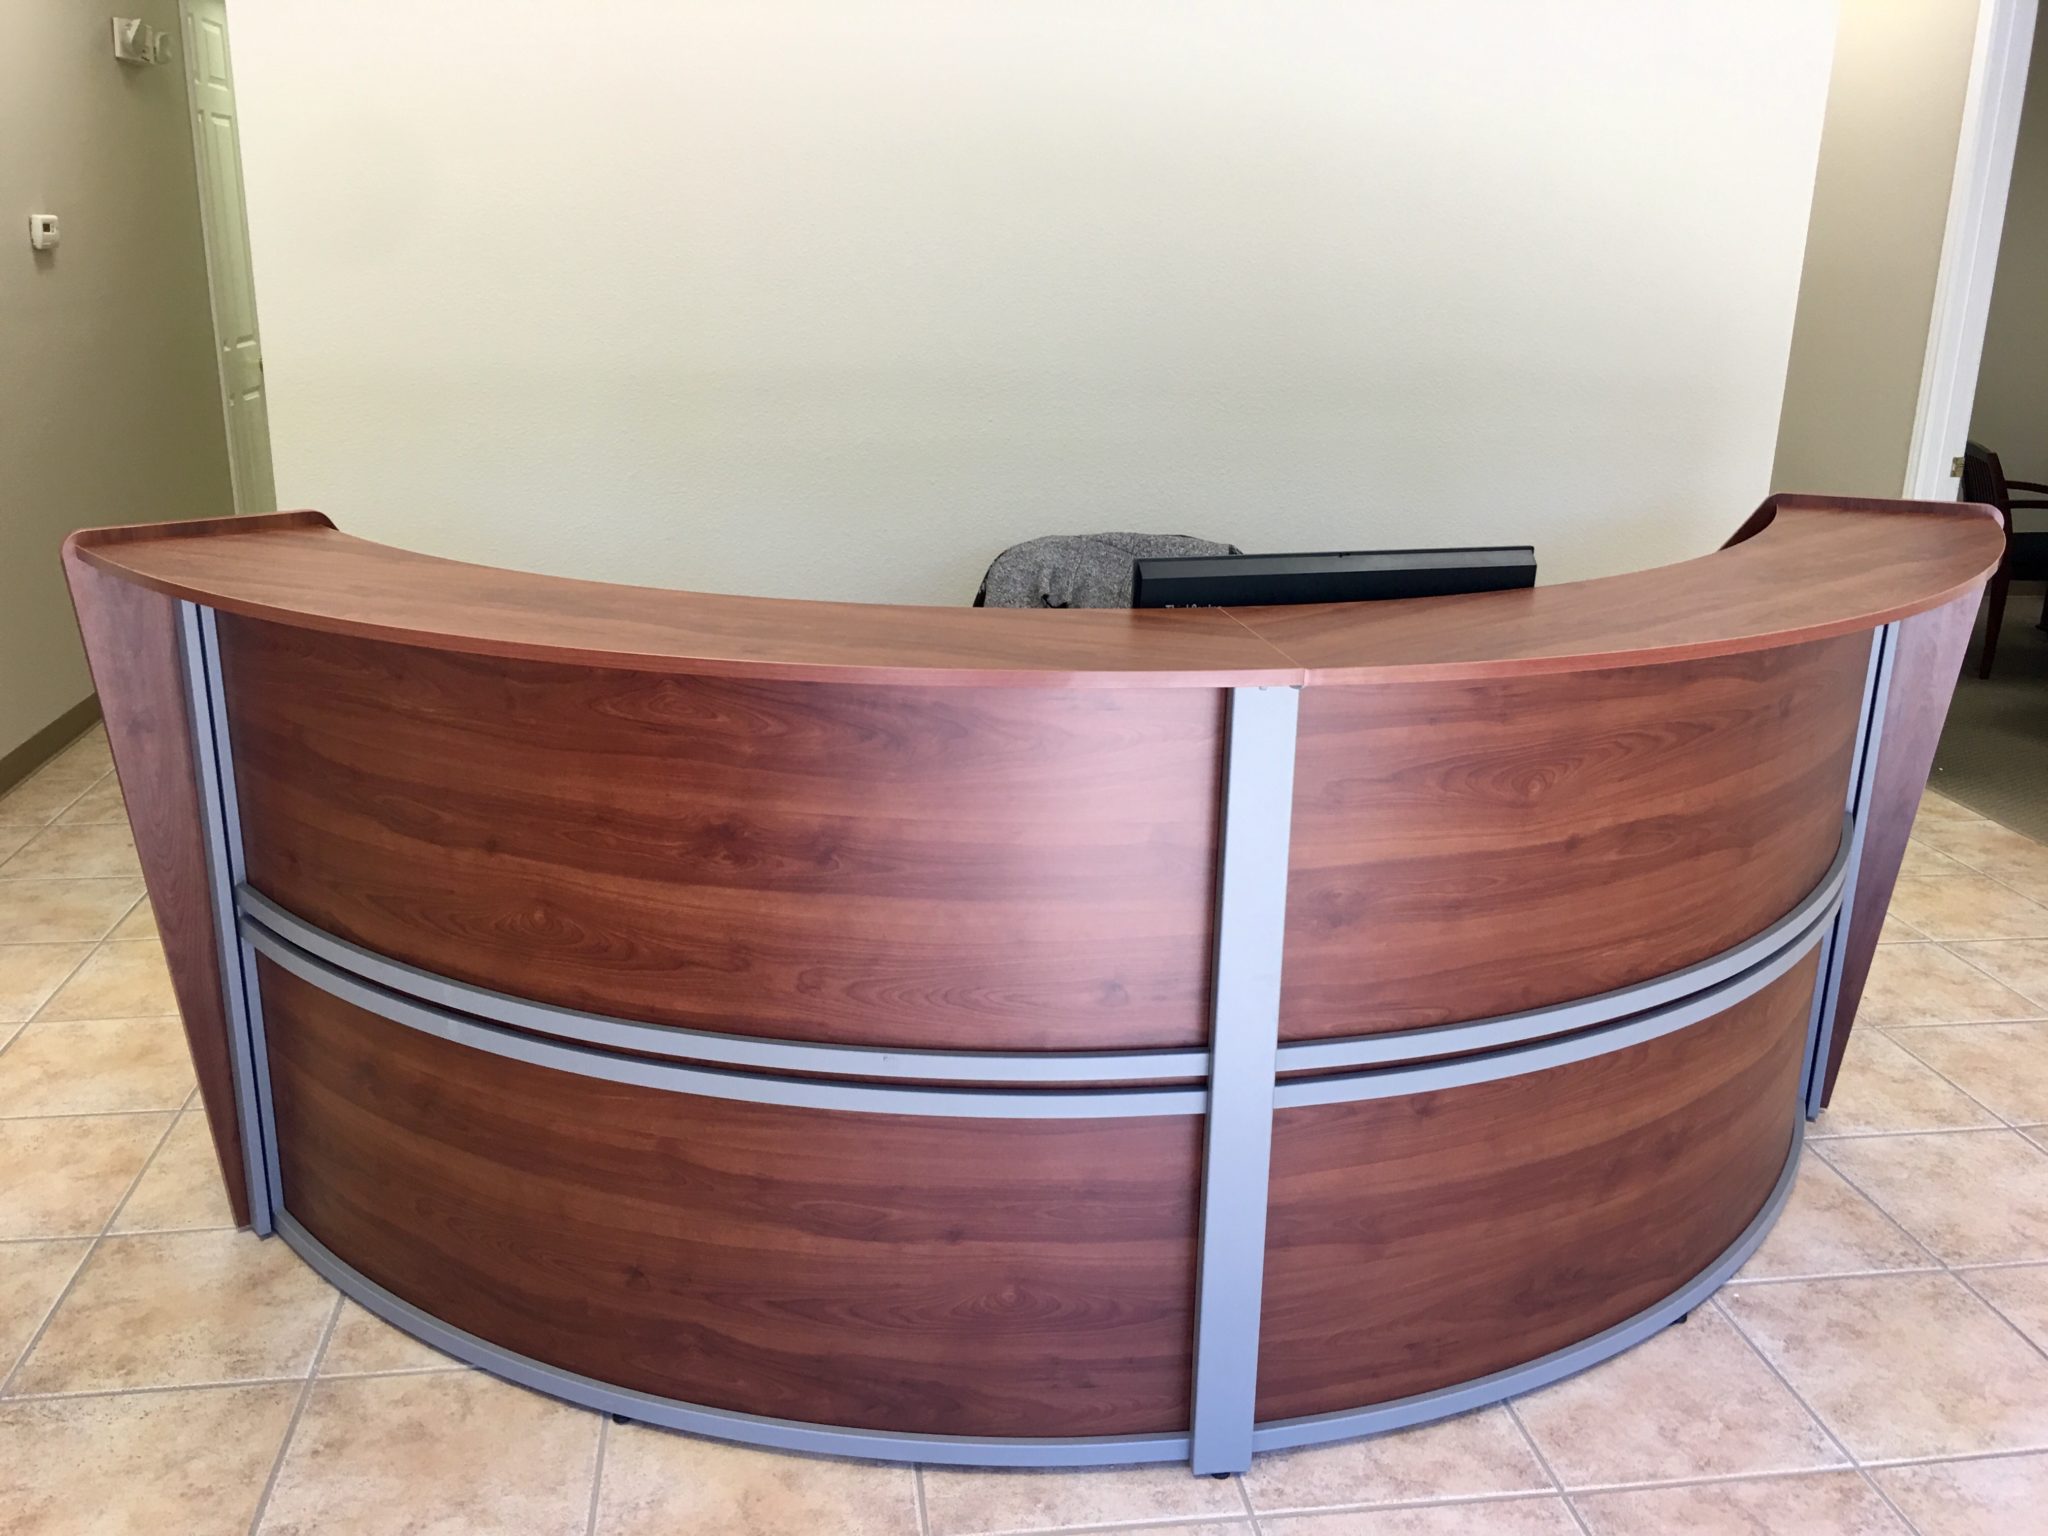 Half Circle Reception Desk with Brushed Silver Trim